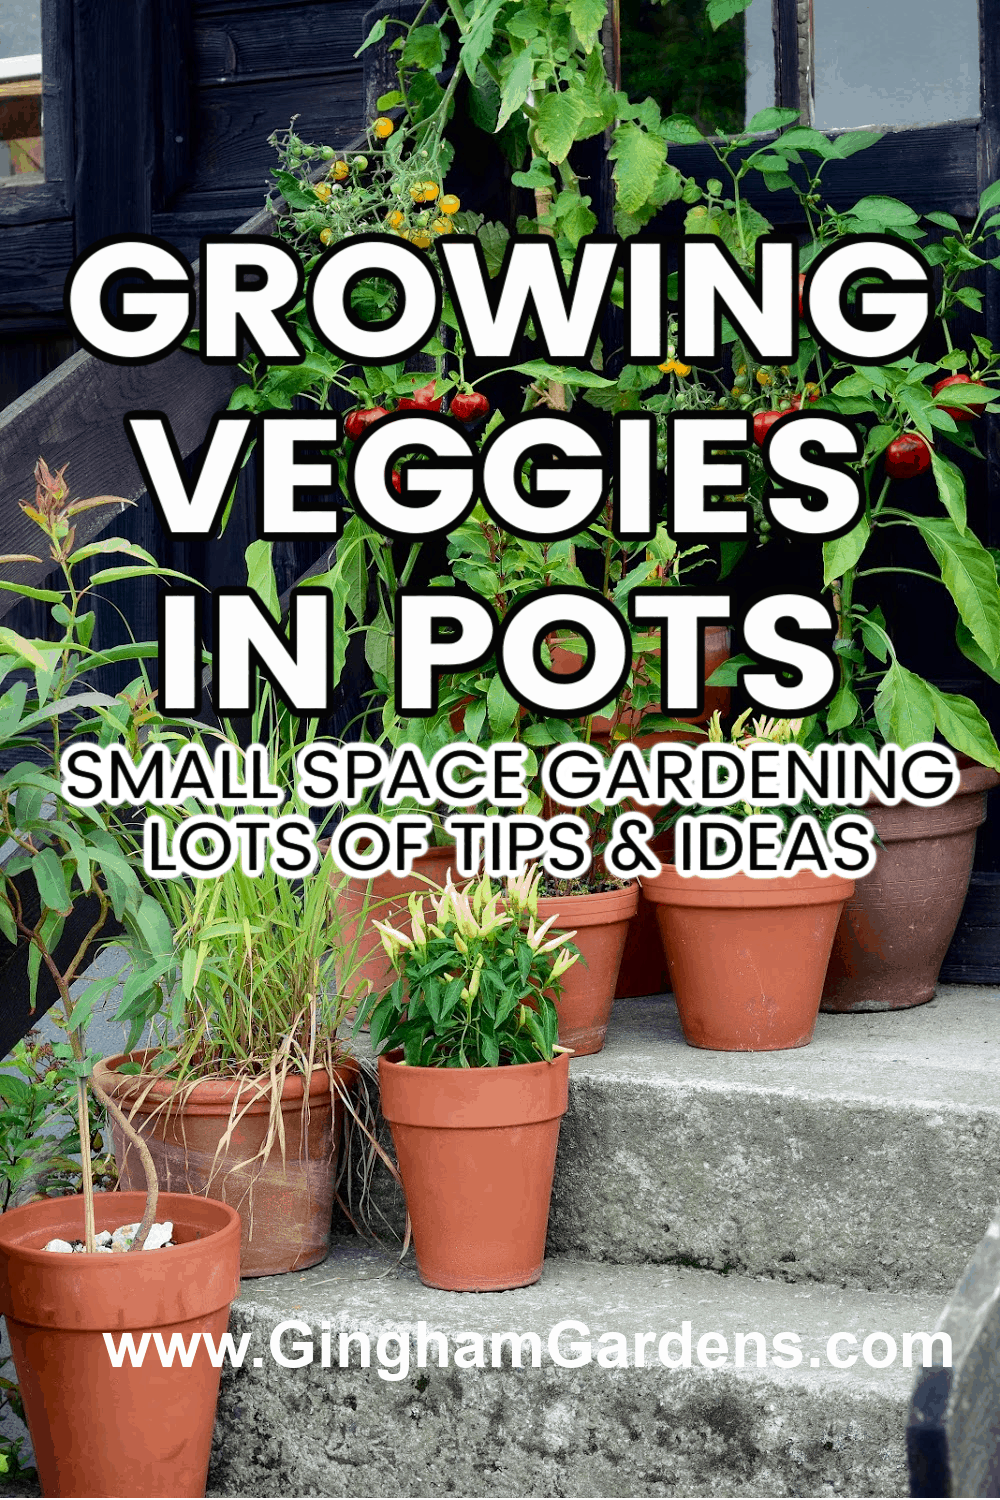 Image of Vegetable Container Garden with text overlay - Growing Veggies in Pots